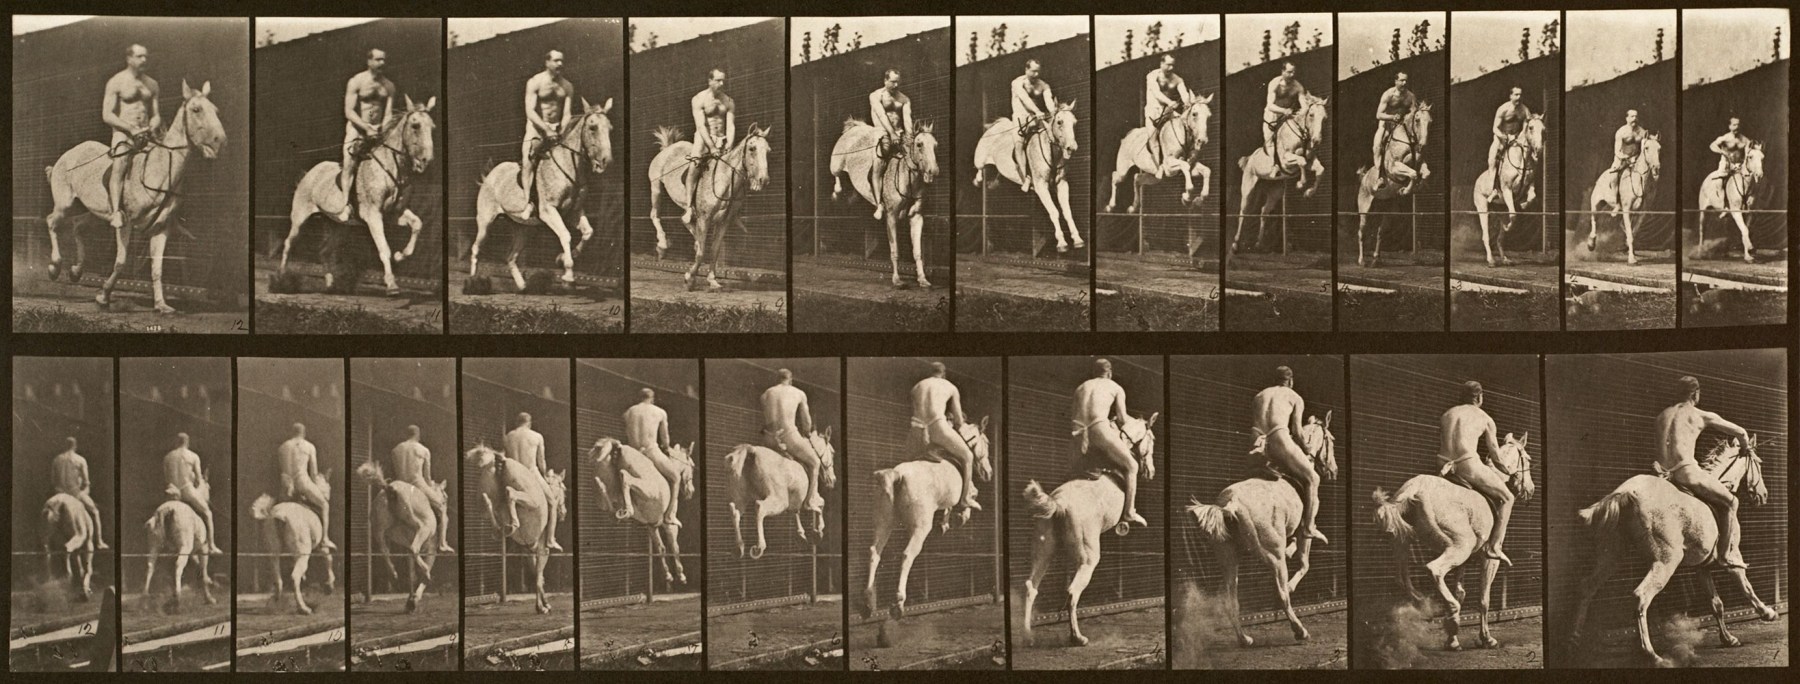 Sequence of black and white photos showing the movements of a horse and nude male rider jumping a hurdle